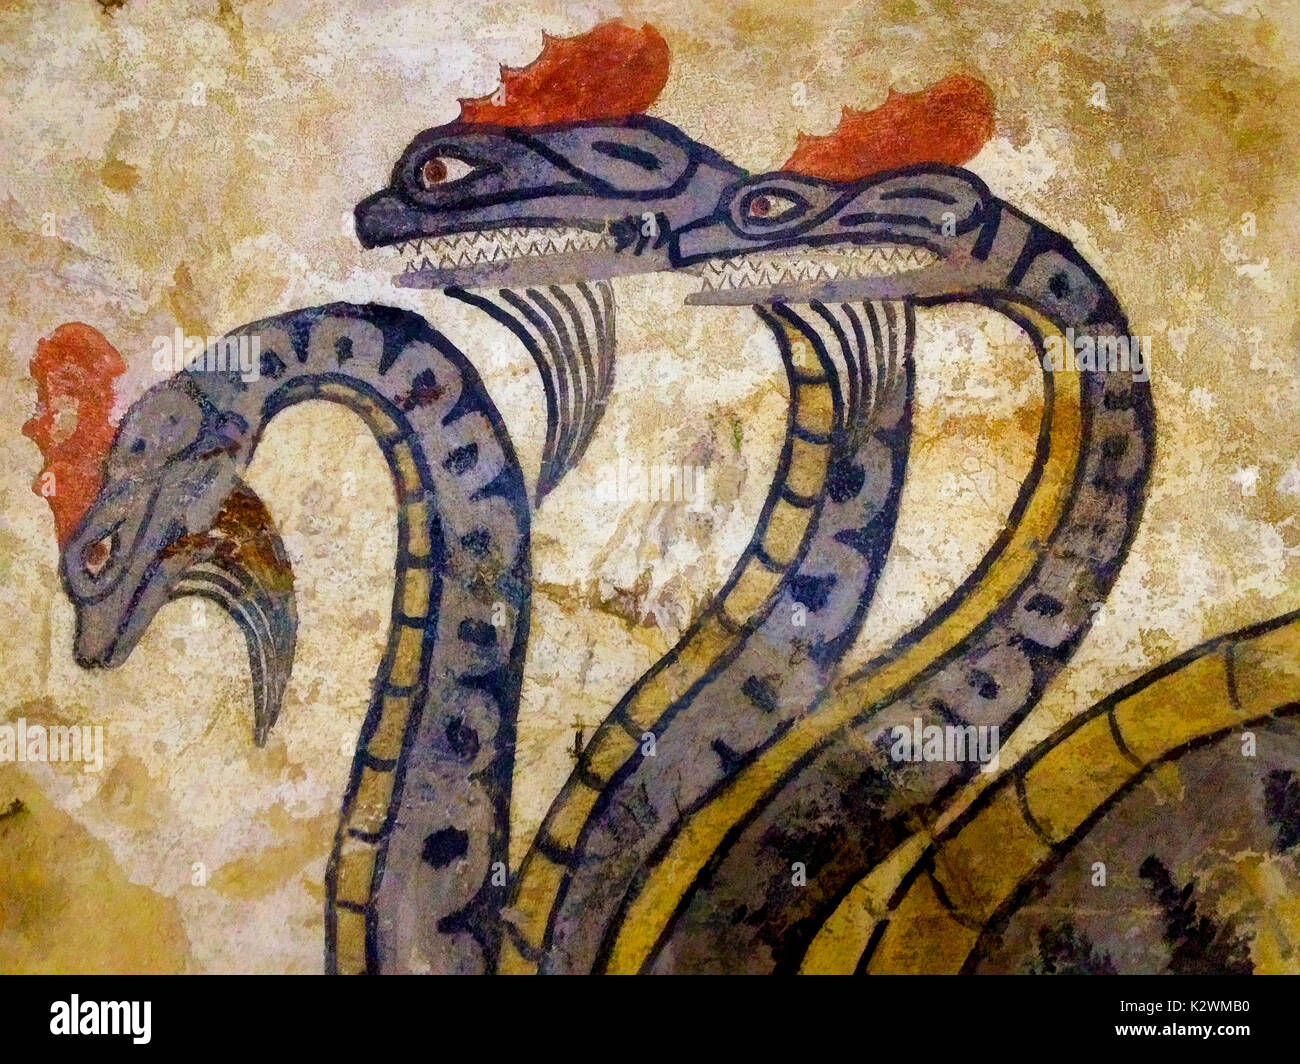 MAGICAL SERPENTS PAINTED ON THE WALL JUST OUTSIDE A RECENTLY DISCOVERED ETRUSCAN TOMB OVER ONE THOUSAND YEARS OLD. THE SERPENTS ARE GUARDIANS. Stock Photo